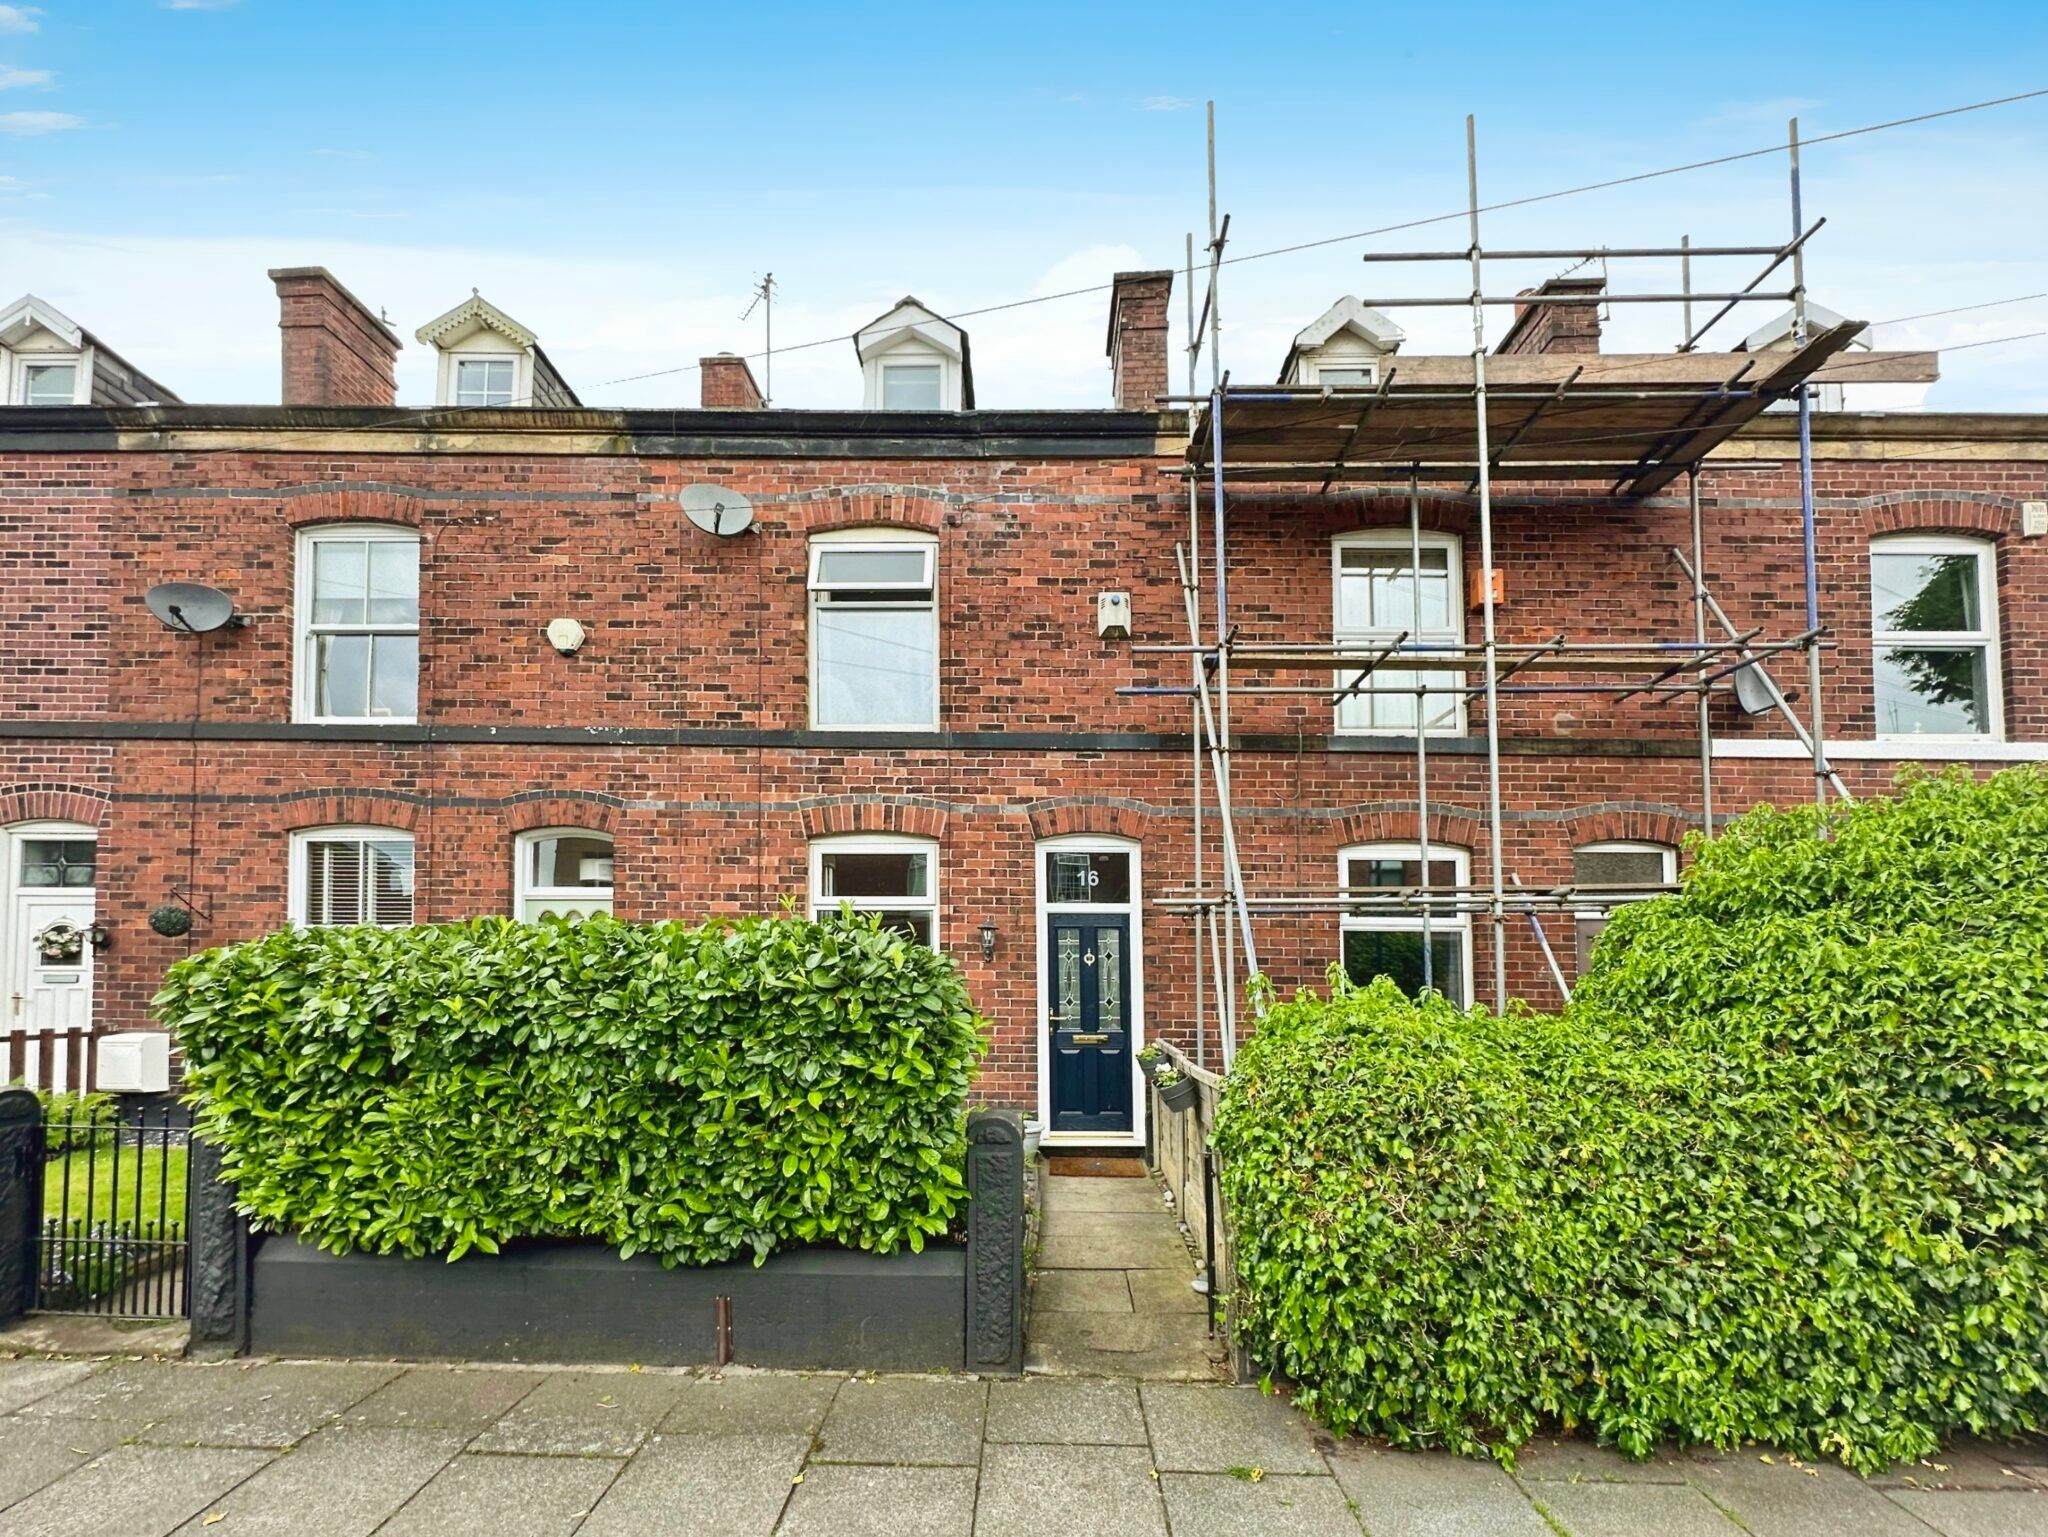 Nipper Lane, Whitefield, Manchester, Manchester, M45 7RF